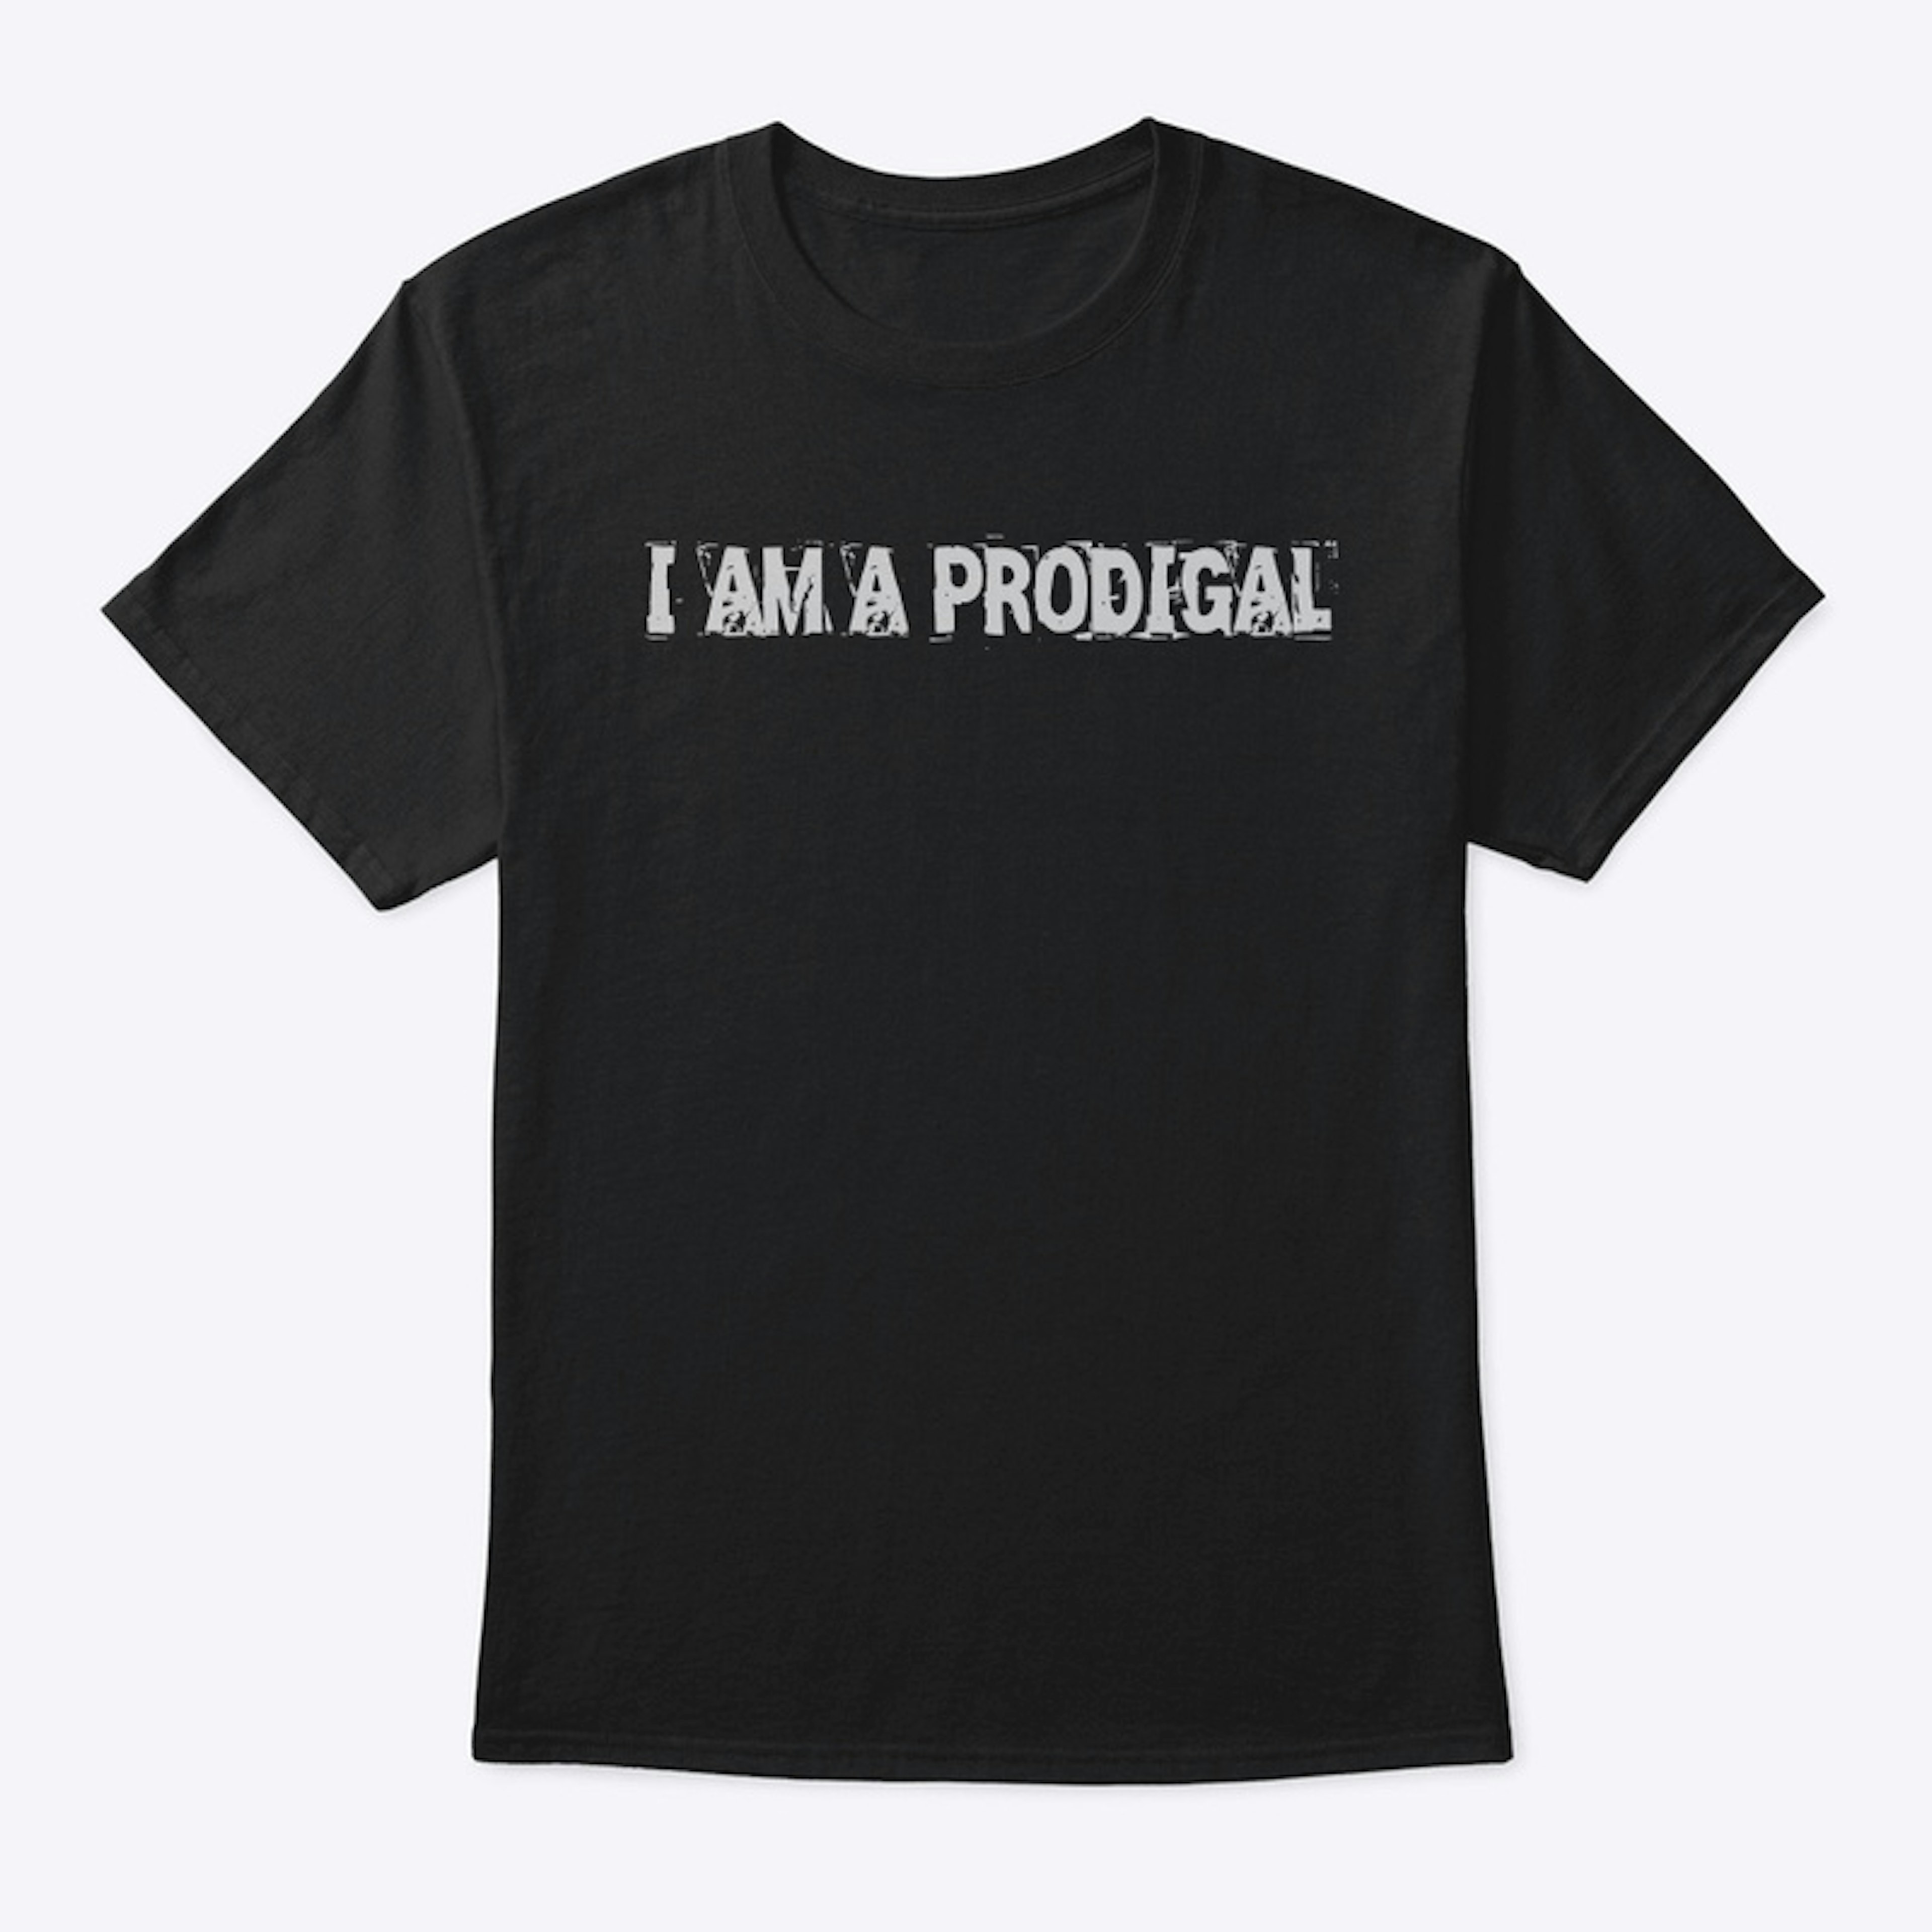 Prodigal Collection